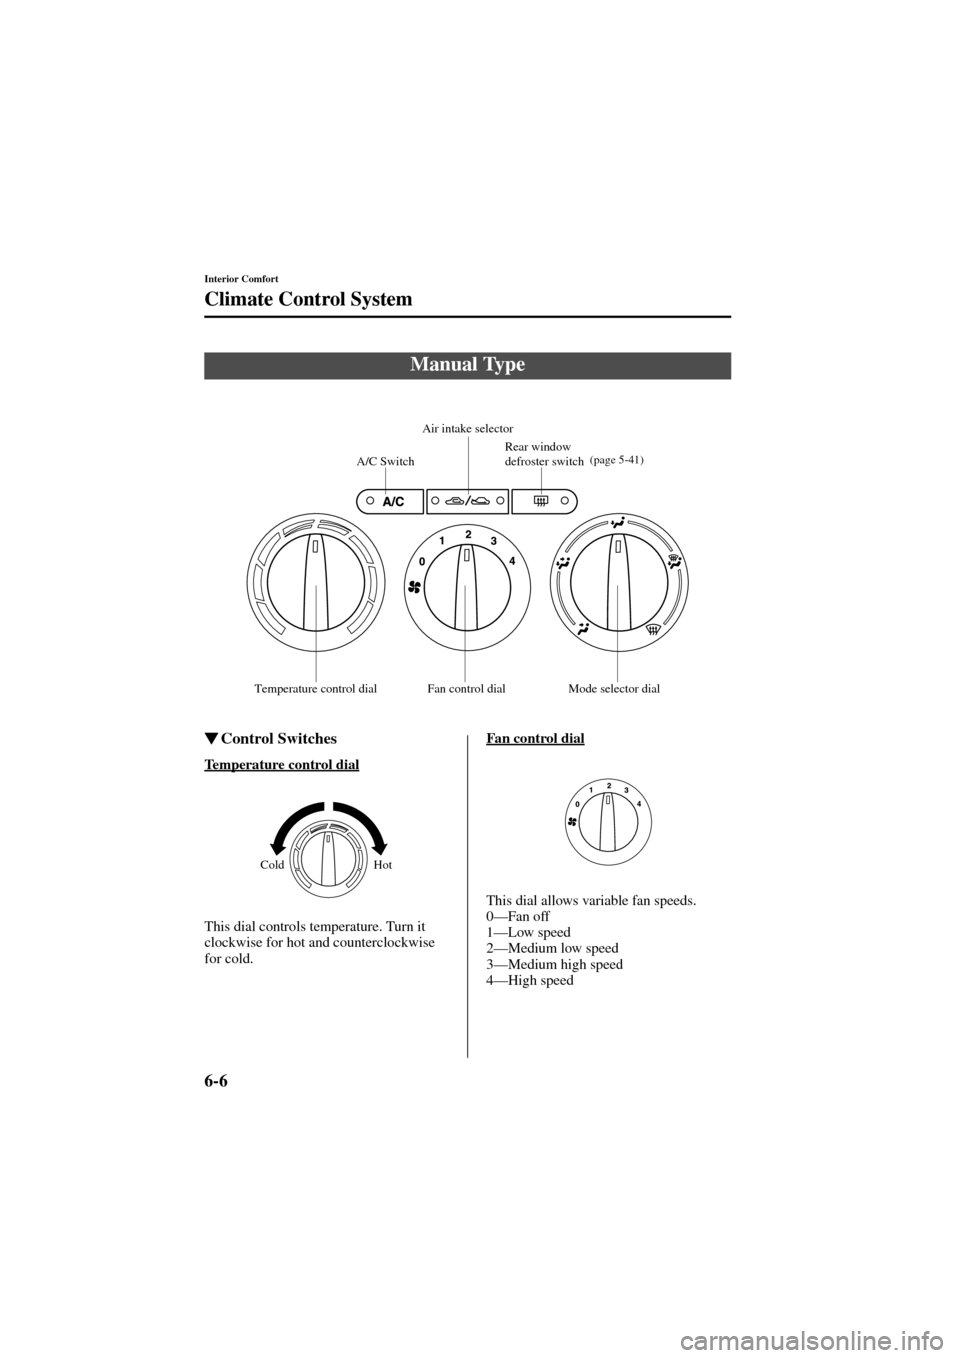 MAZDA MODEL 6 2004  Owners Manual (in English) 6-6
Interior Comfort
Climate Control System
Form No. 8R29-EA-02I
Control Switches
Temperature control dial
This dial controls temperature. Turn it 
clockwise for hot and counterclockwise 
for cold.Fa